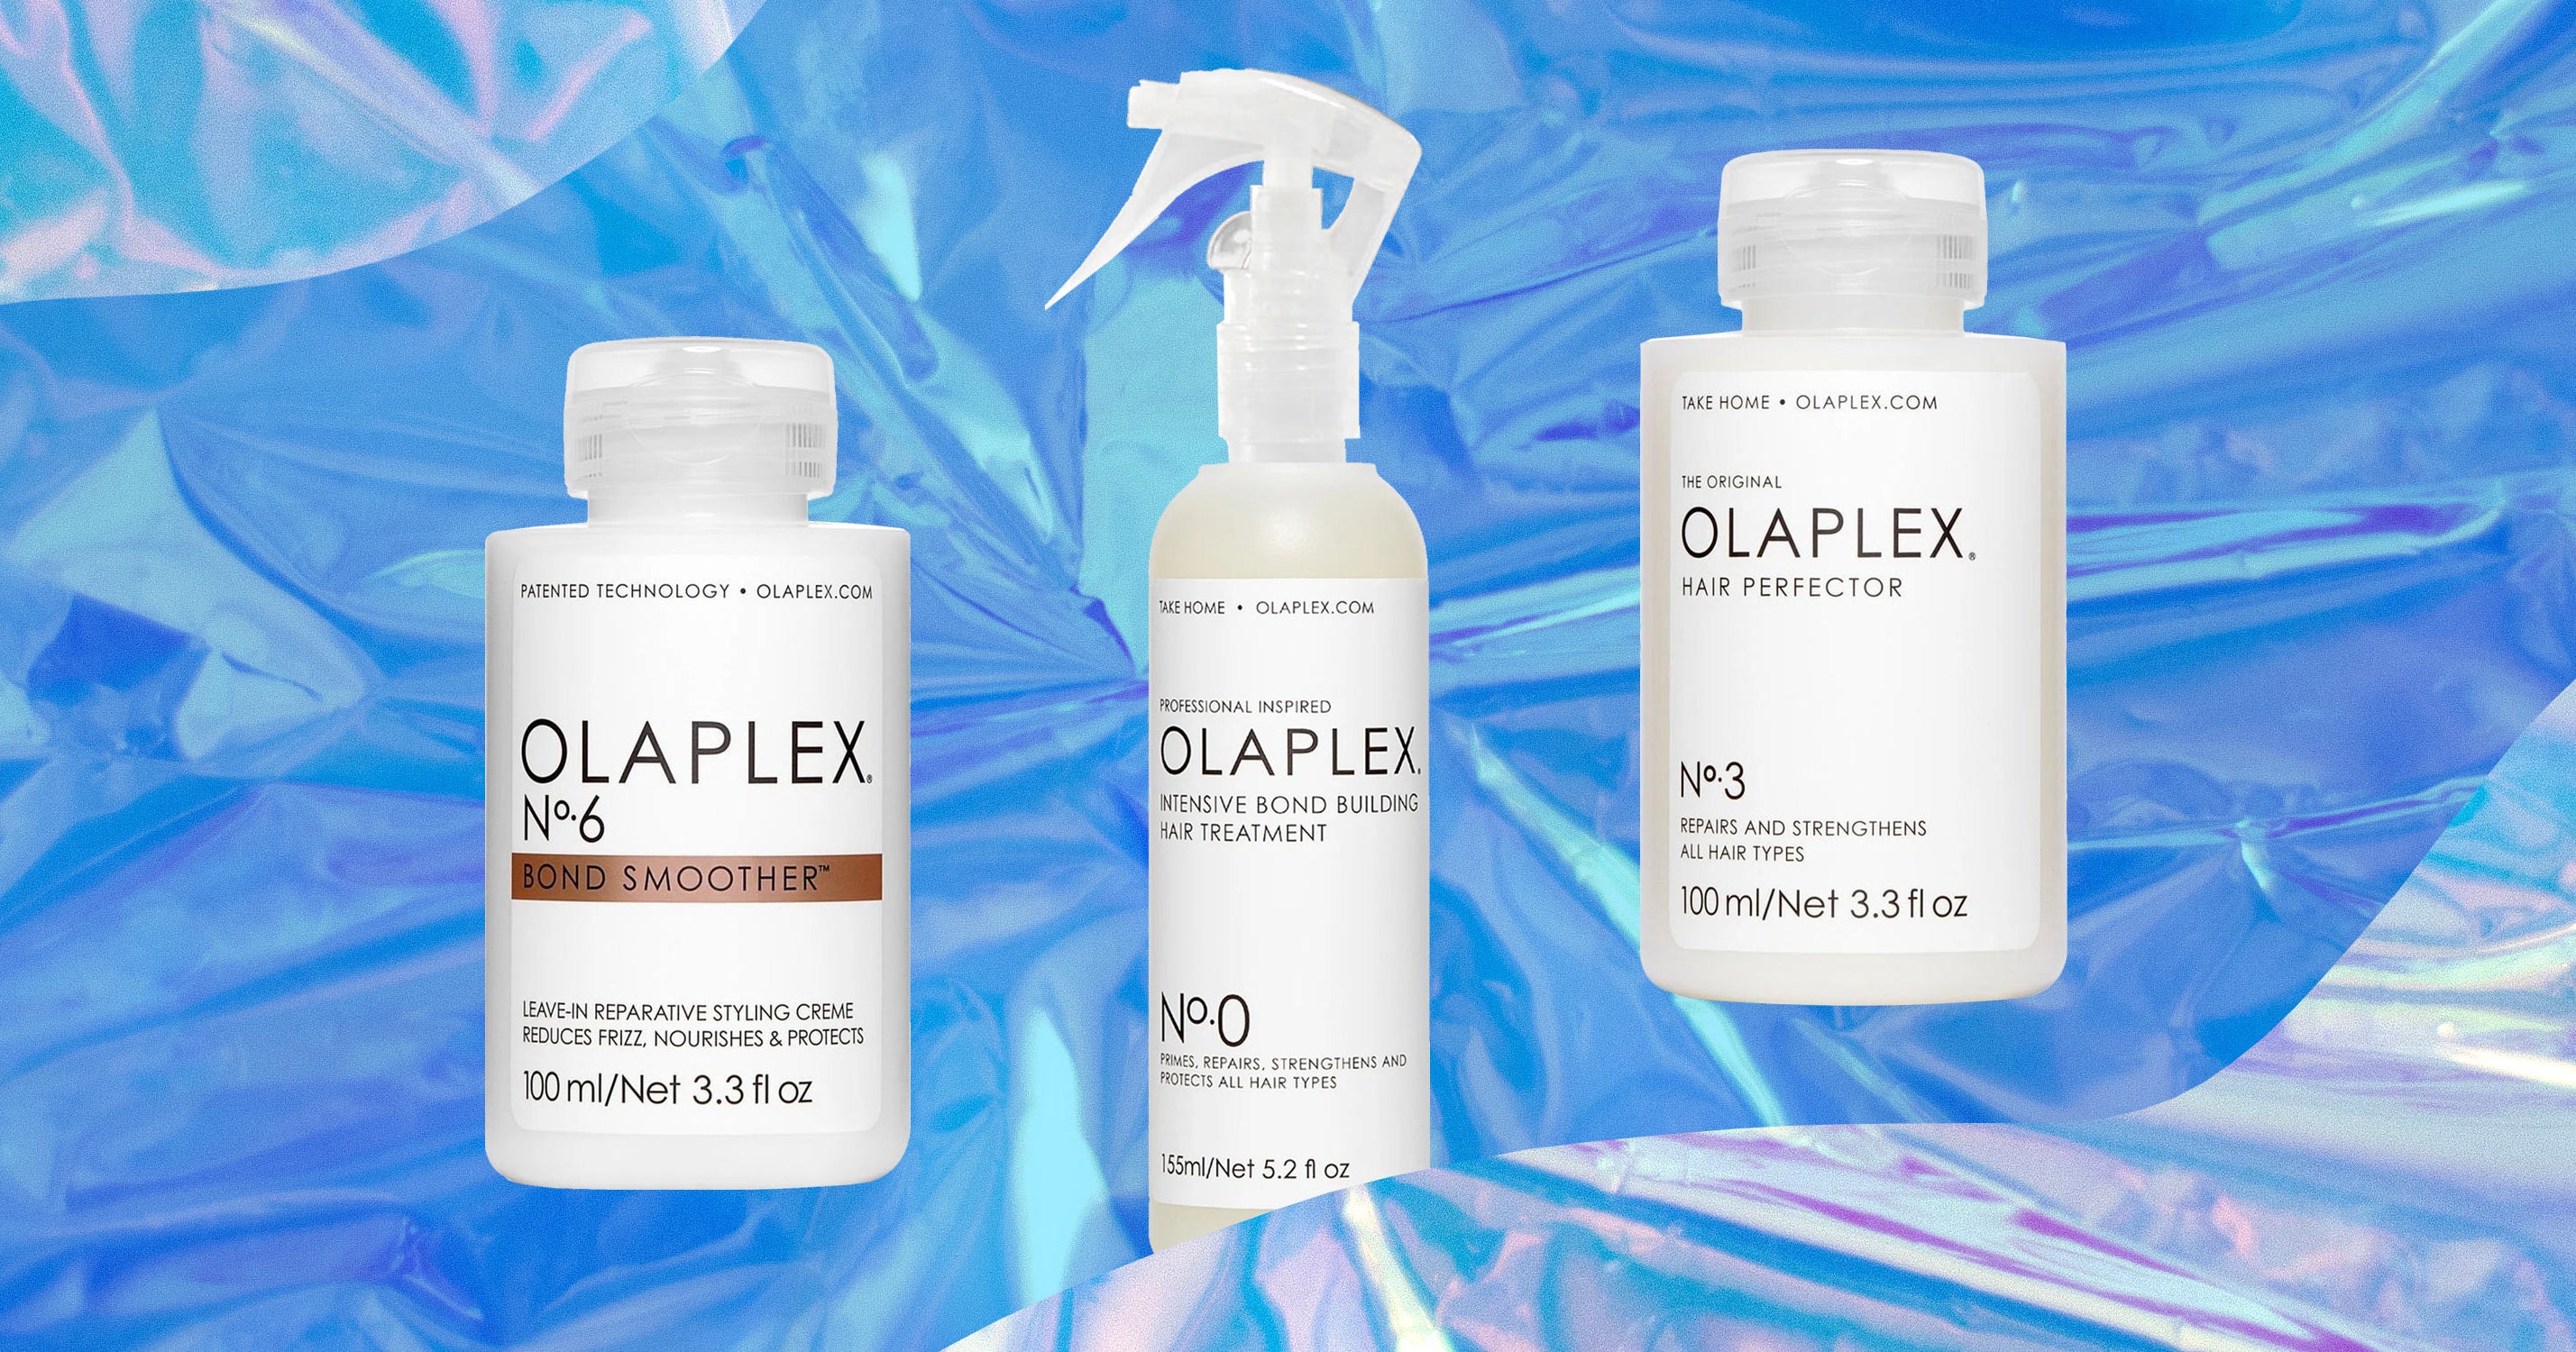 I Tried The Full Olaplex Routine, Here Are My Thoughts